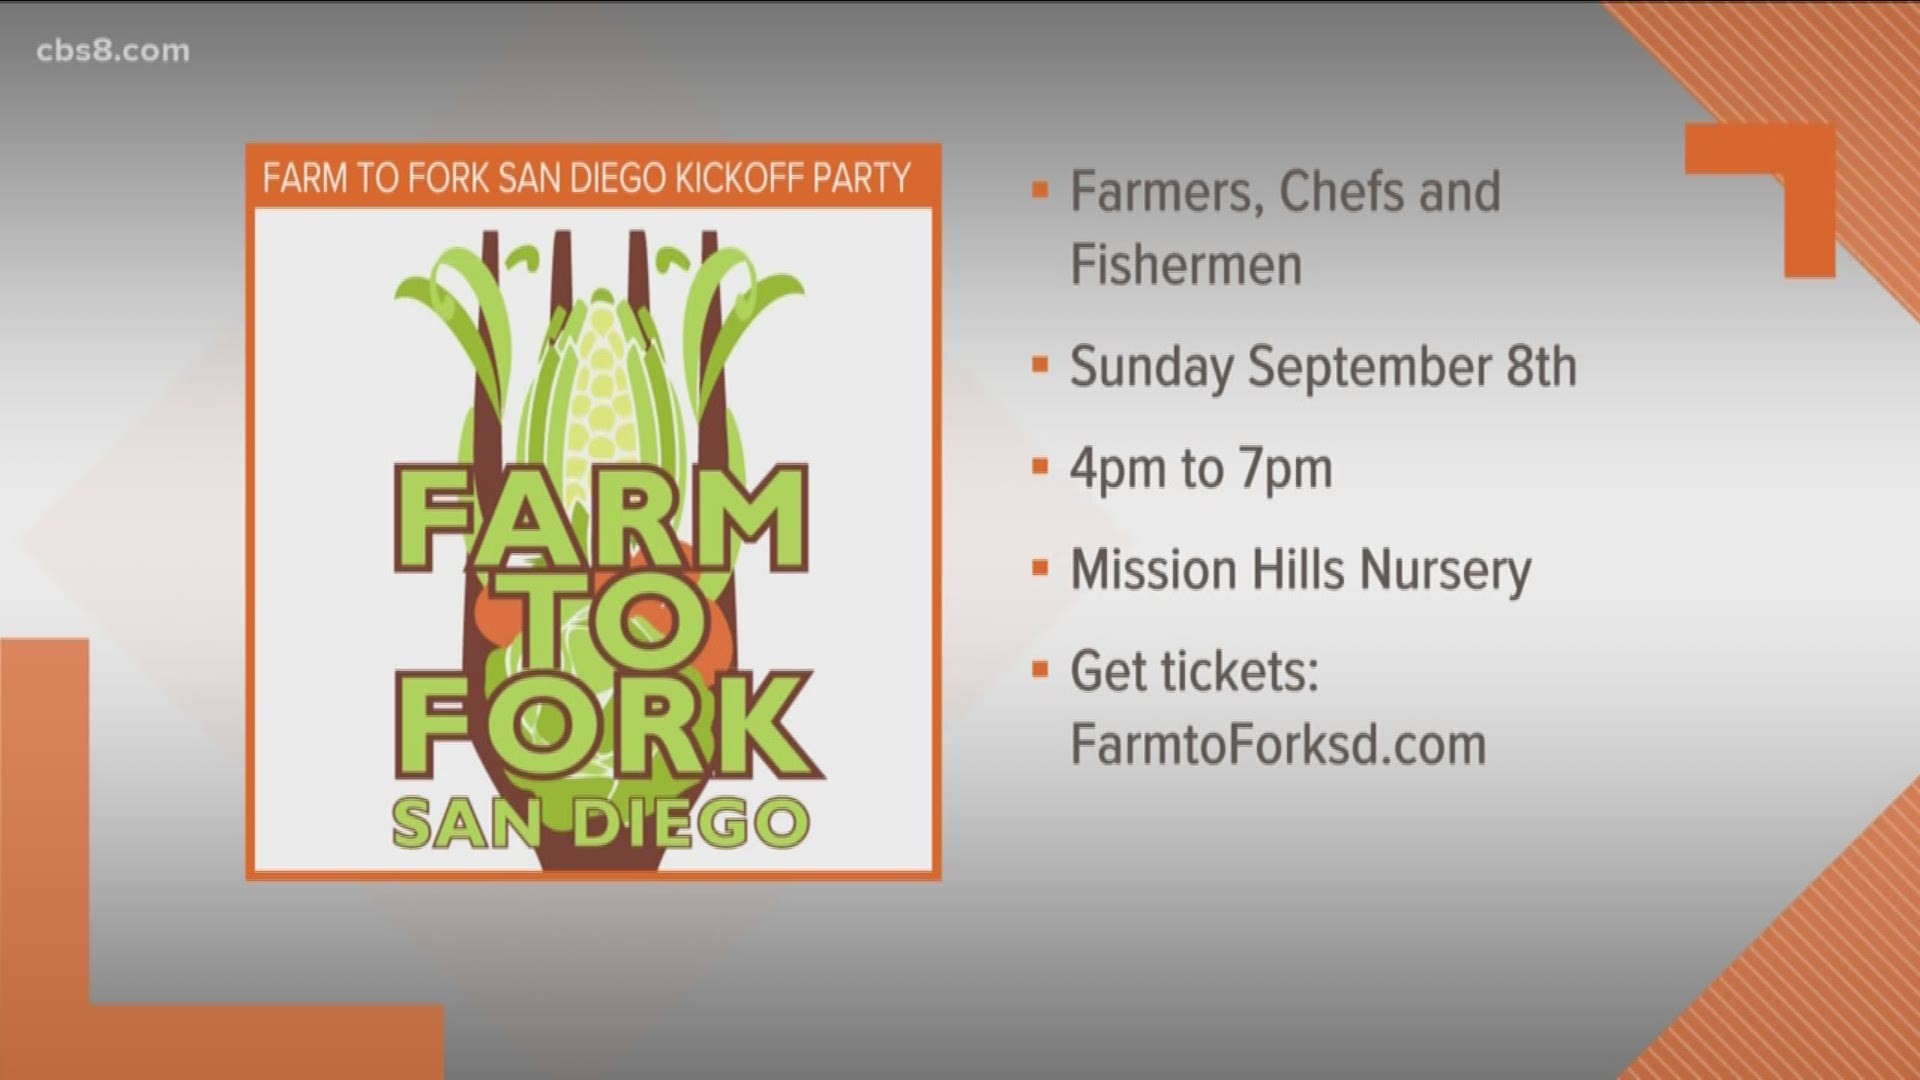 Farm to Fork week is your chance to try special drinks and dishes, special menus and special events happening on September 8-15